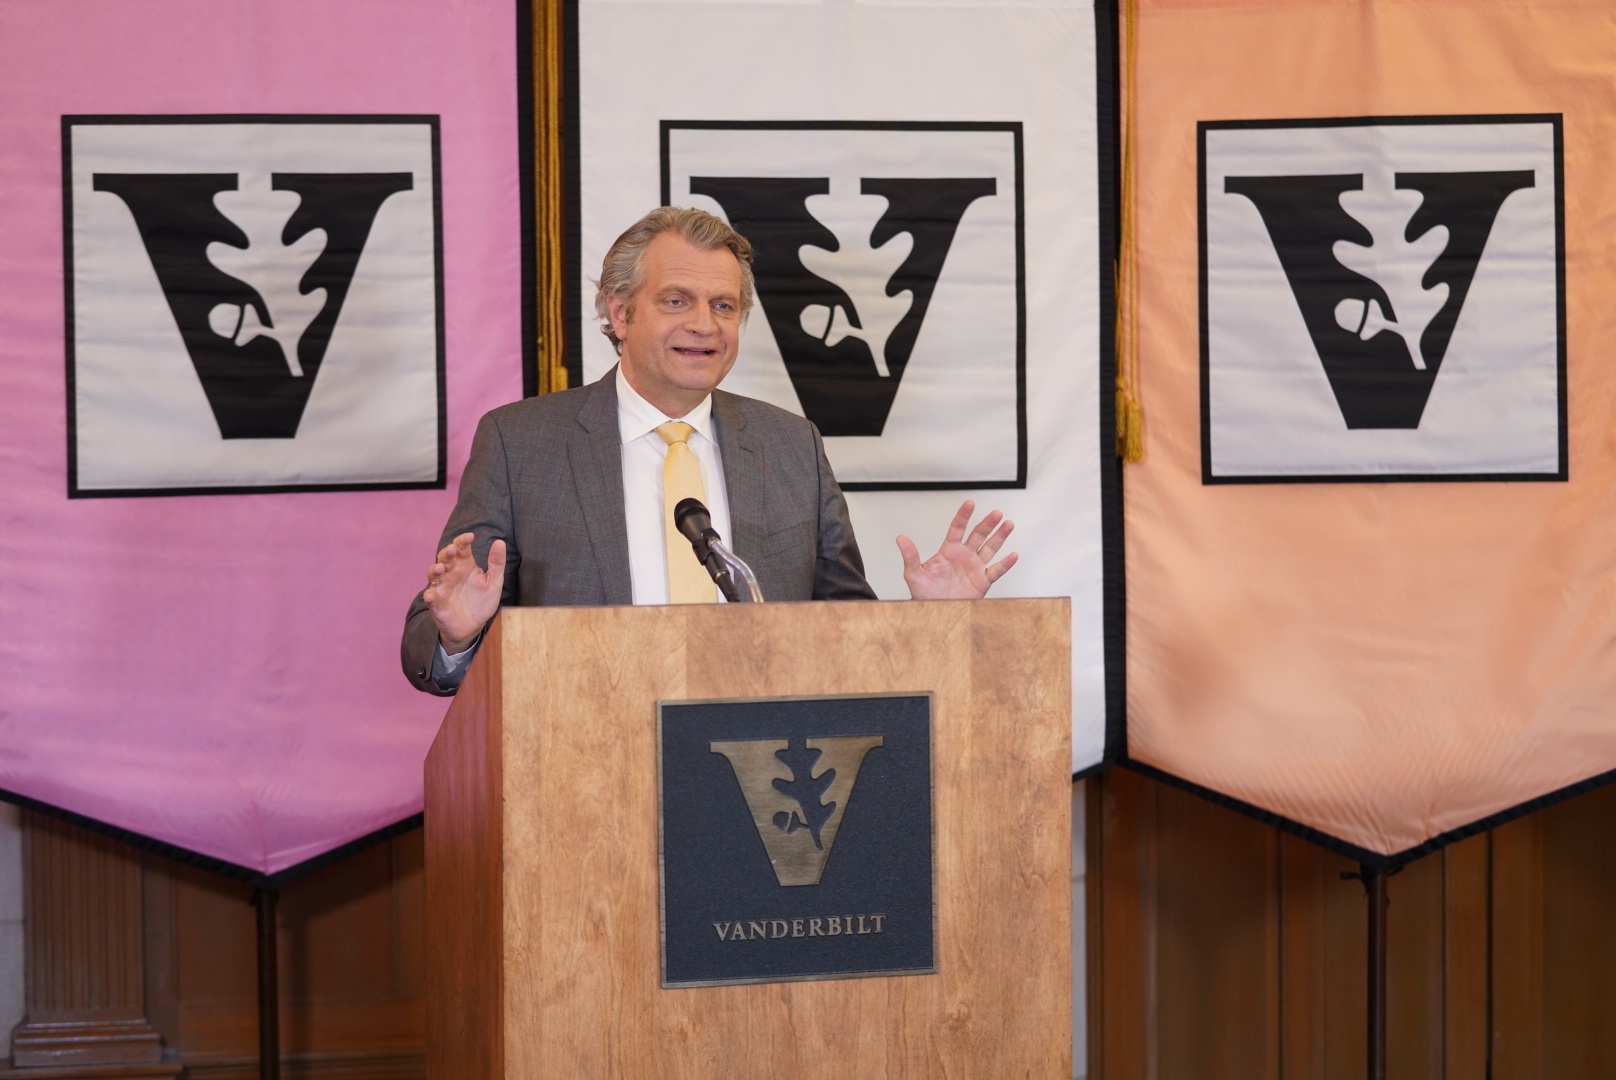 Chancellor says Vanderbilt emerged stronger, ready for the future after year of challenges